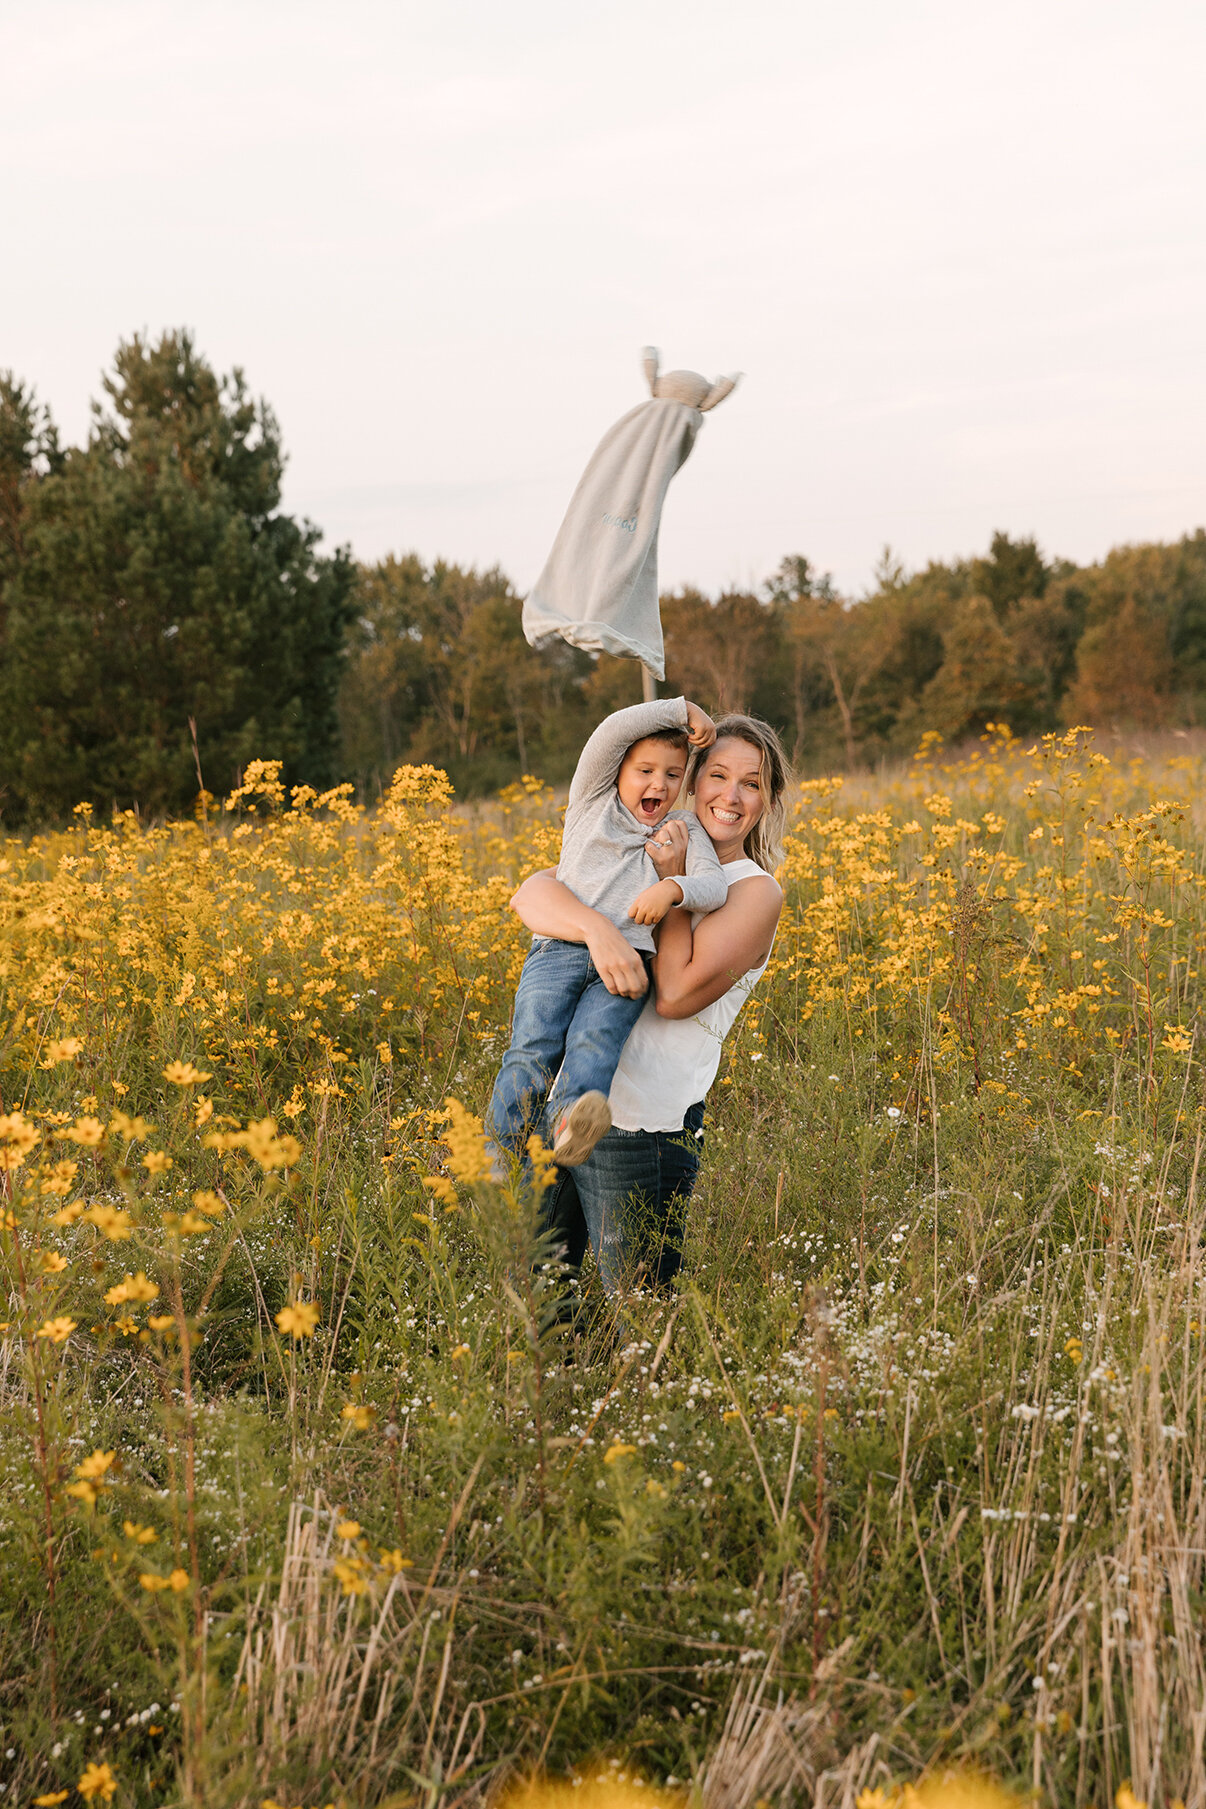 Lifestyle_Family_Session_Wildflower_Field_in_Bristol_OH_Country_Setting_Family_Photos_at_Dusk_by_Child_and_Family_Photographer_Christie_Leigh_Photo_in_Cortland_Ohio-16.JPG